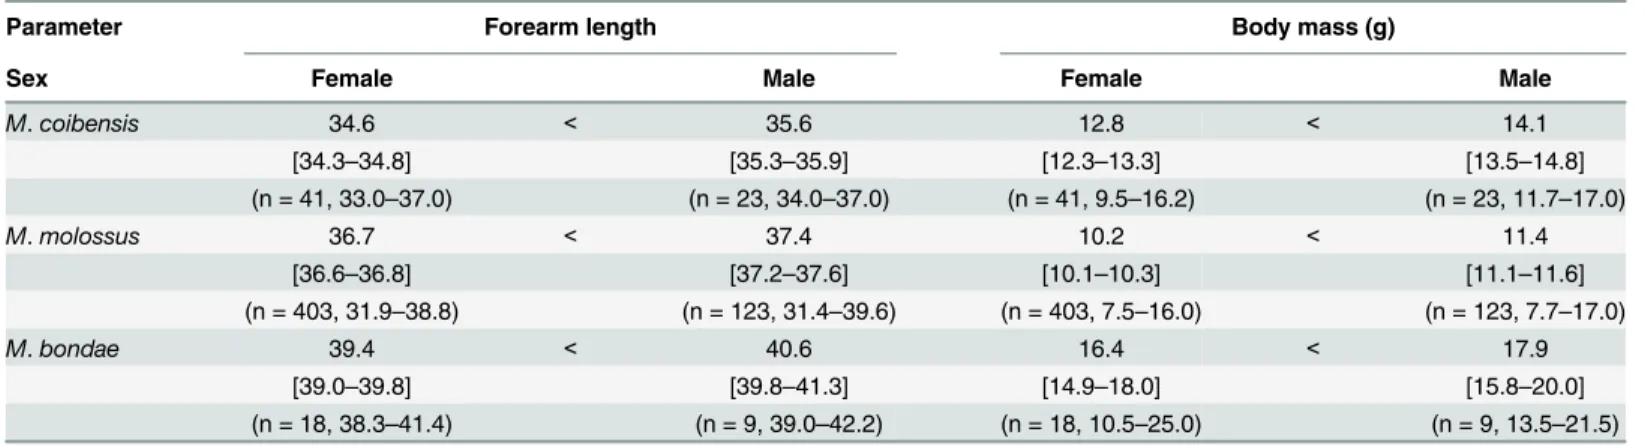 Table 2. Sex-specific means, [95% CI], sample size and range of forearm length and body mass.